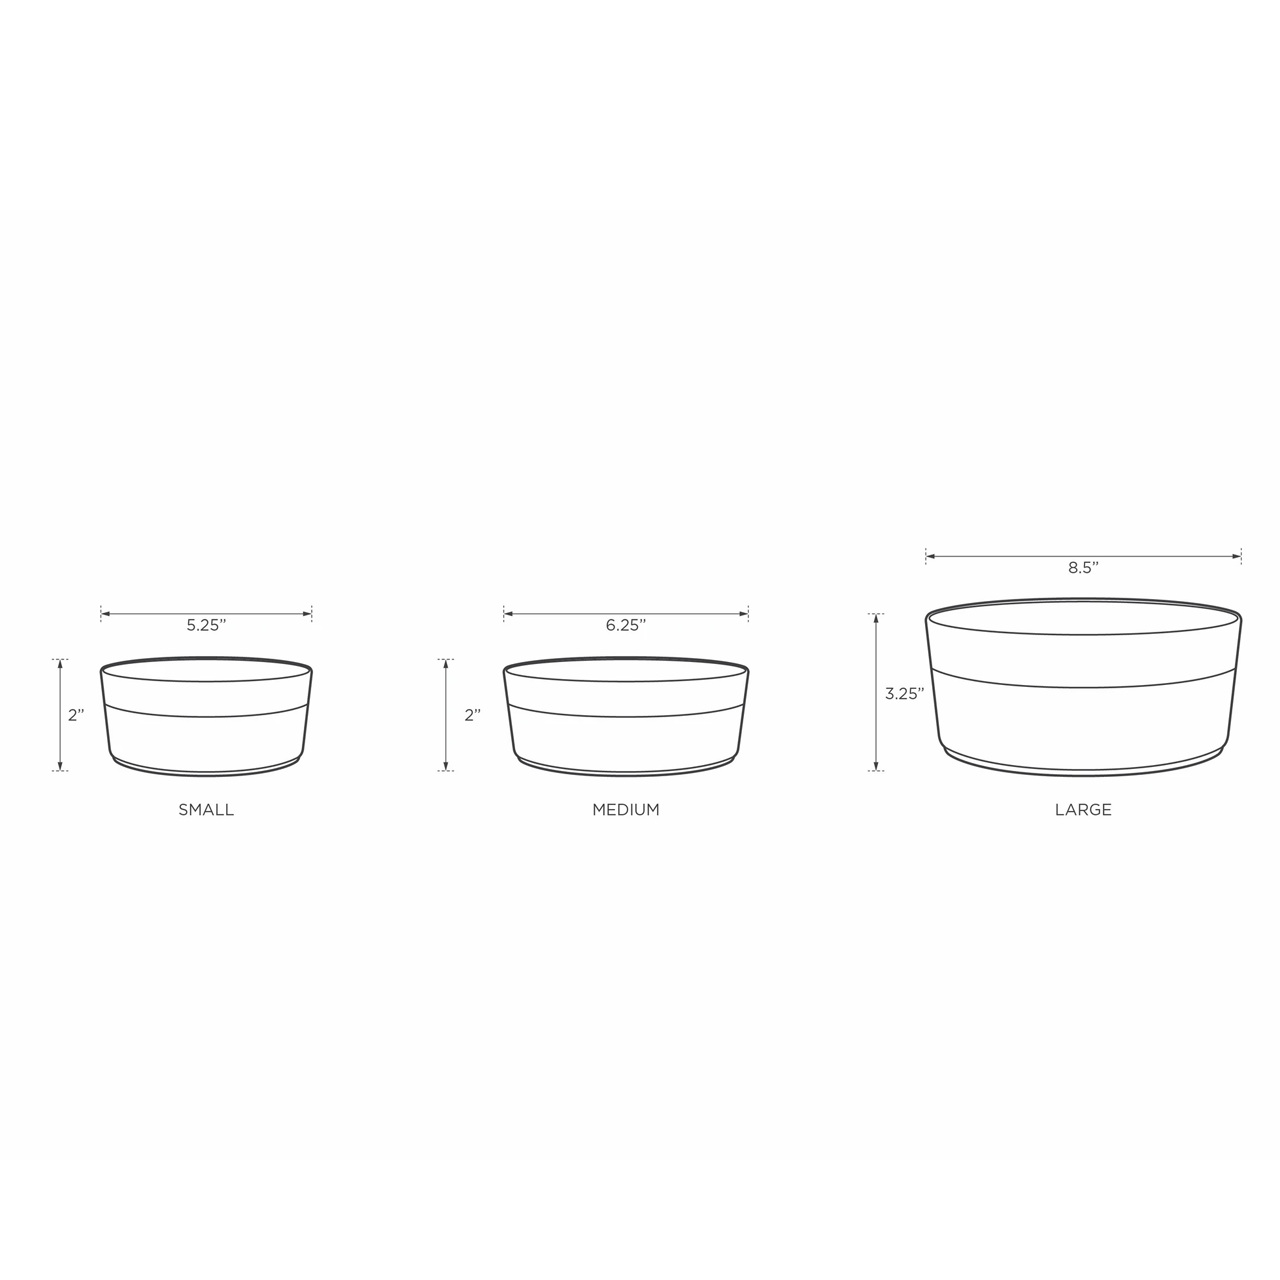 Dog Dining - Dog Bowl - Classic DOG Bowl Sizes by Park Life Designs